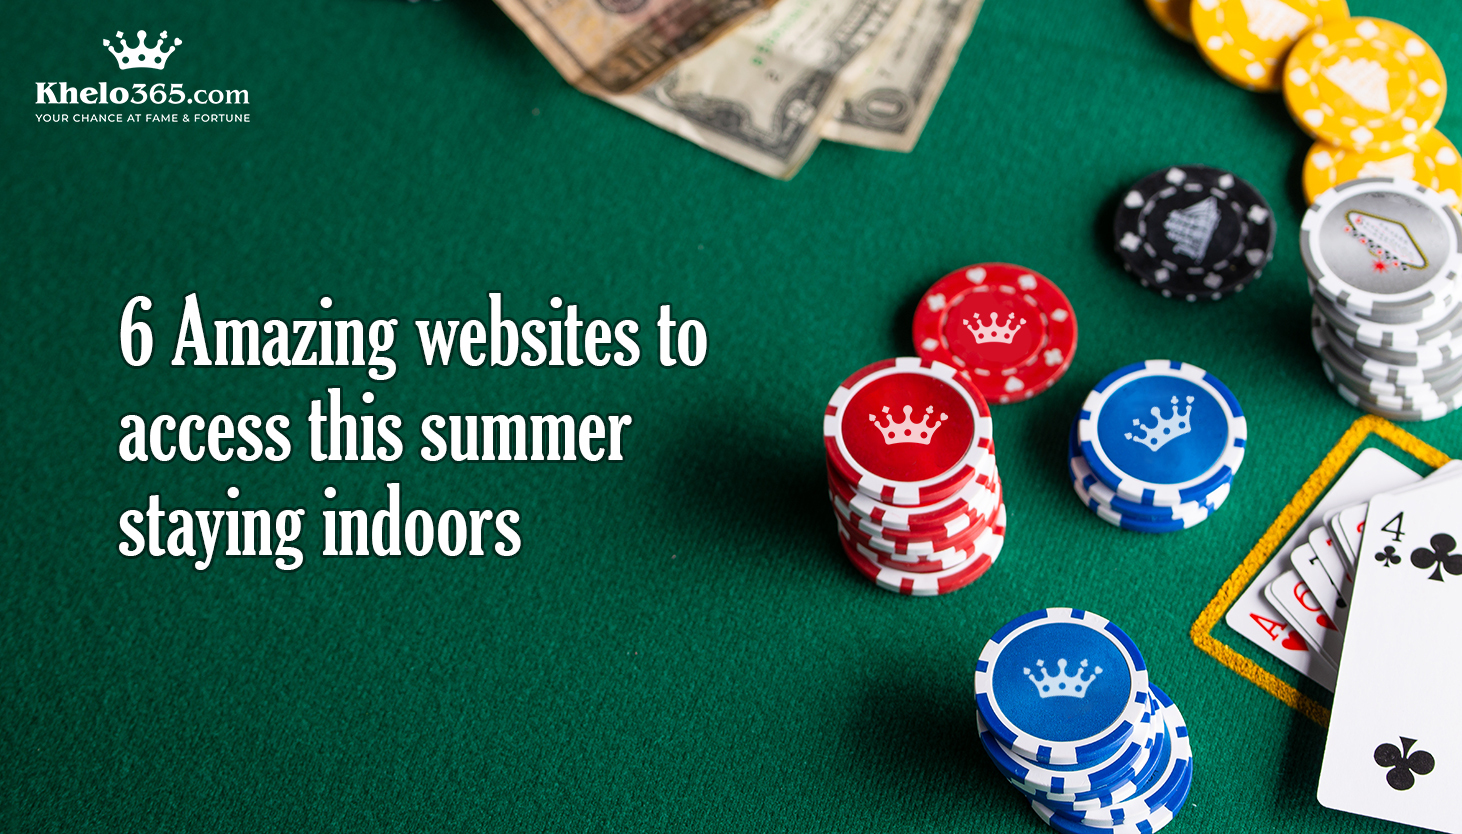 6-Amazing-websites-to-access-this-summer-staying-indoors